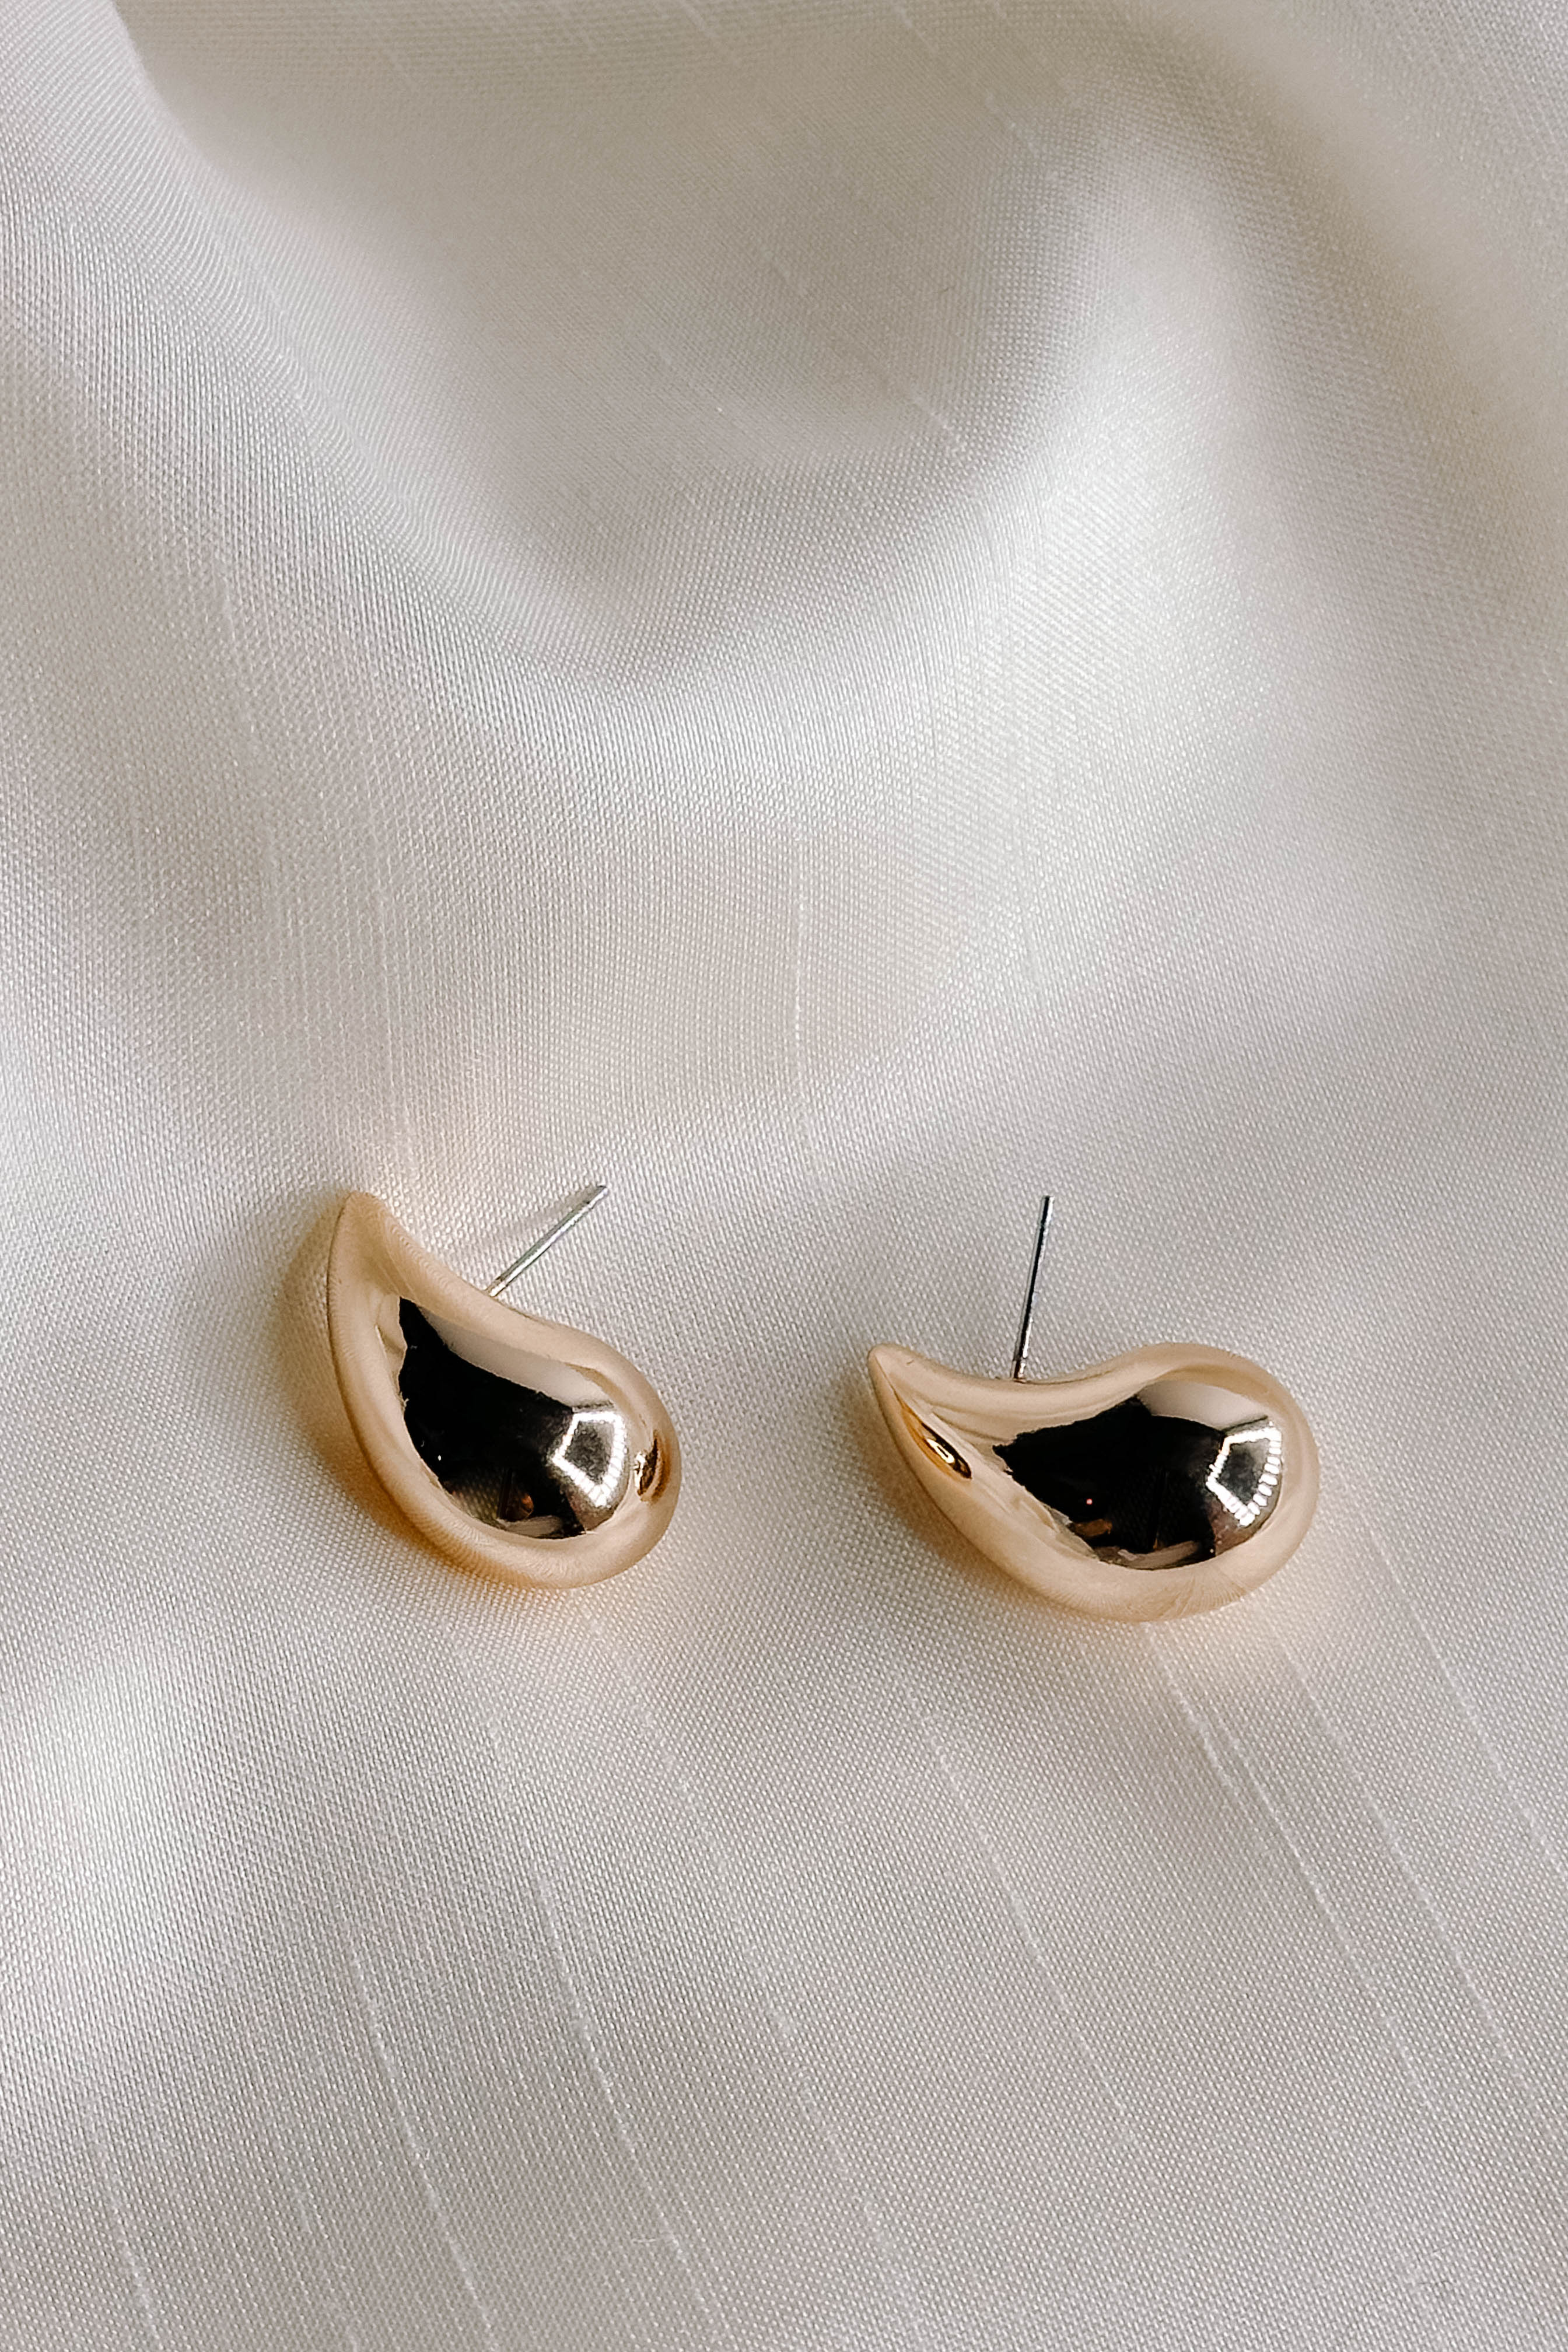 Side view flat lay of the Claire Gold Teardrop Stud Earrings that have thick gold scooped studs, shown on cream fabric..